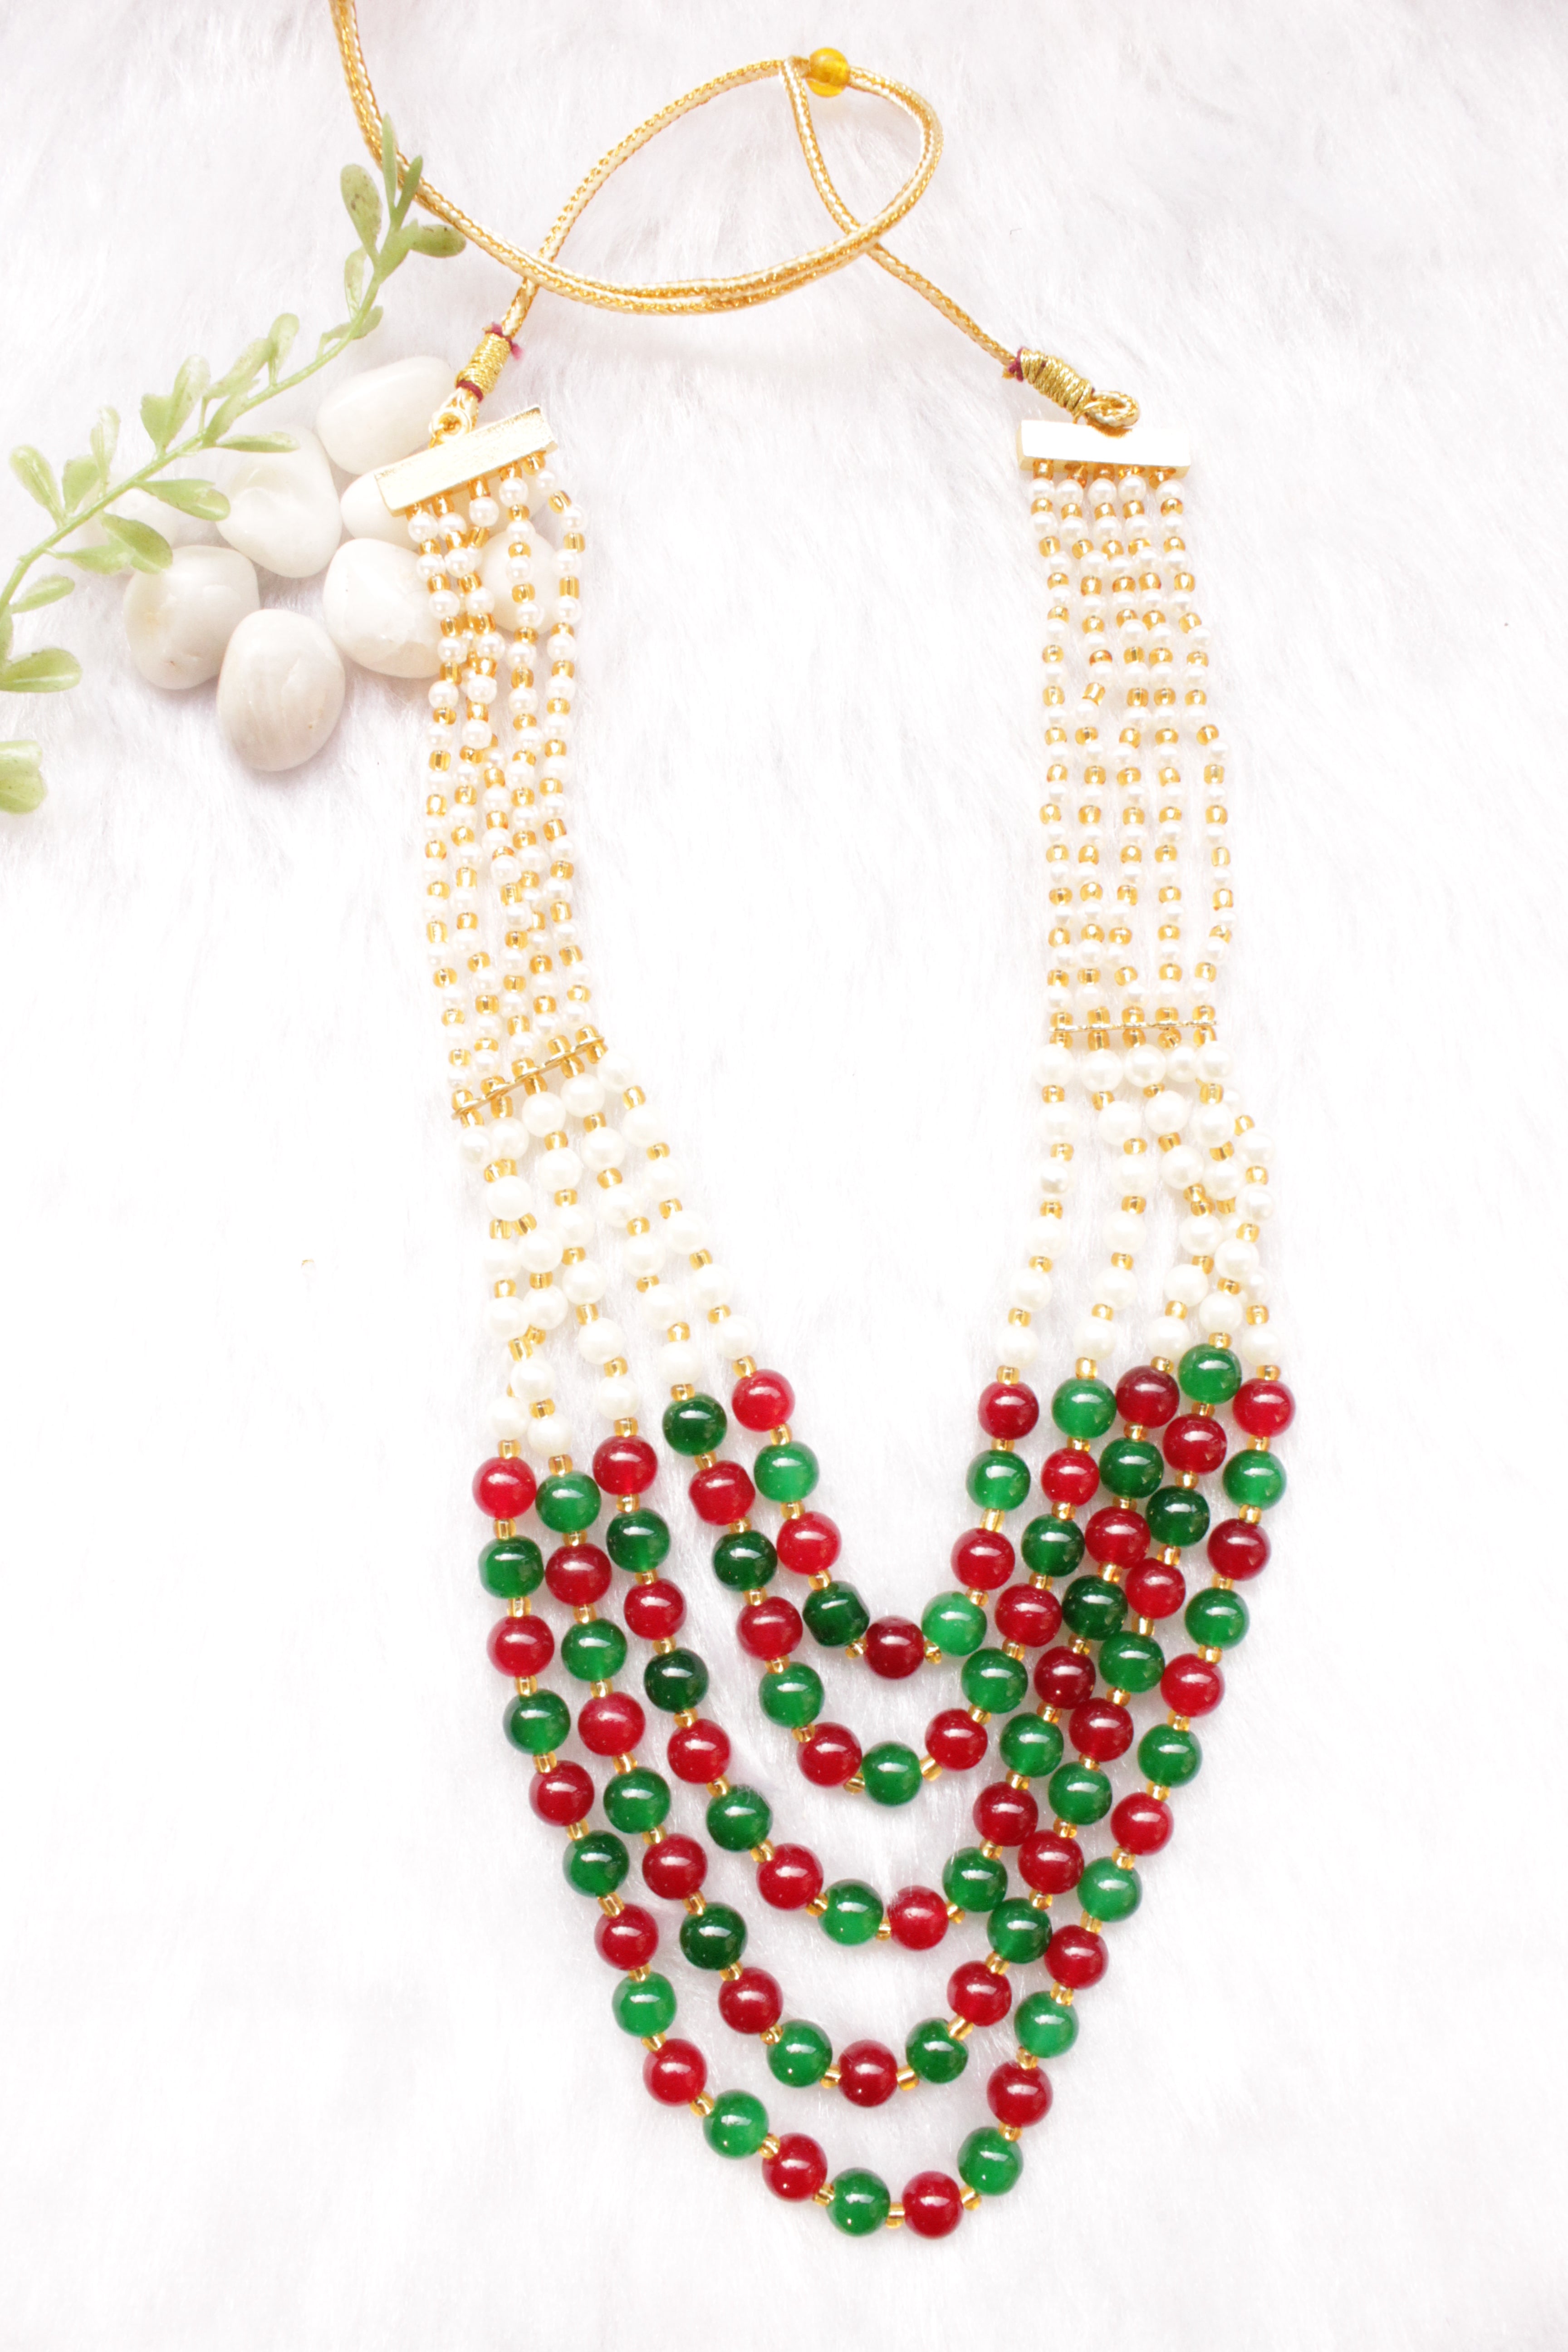 Red, Green and White Glass Beads Braided with Gold Metal Beads 5 Layer Gold Finish Necklace